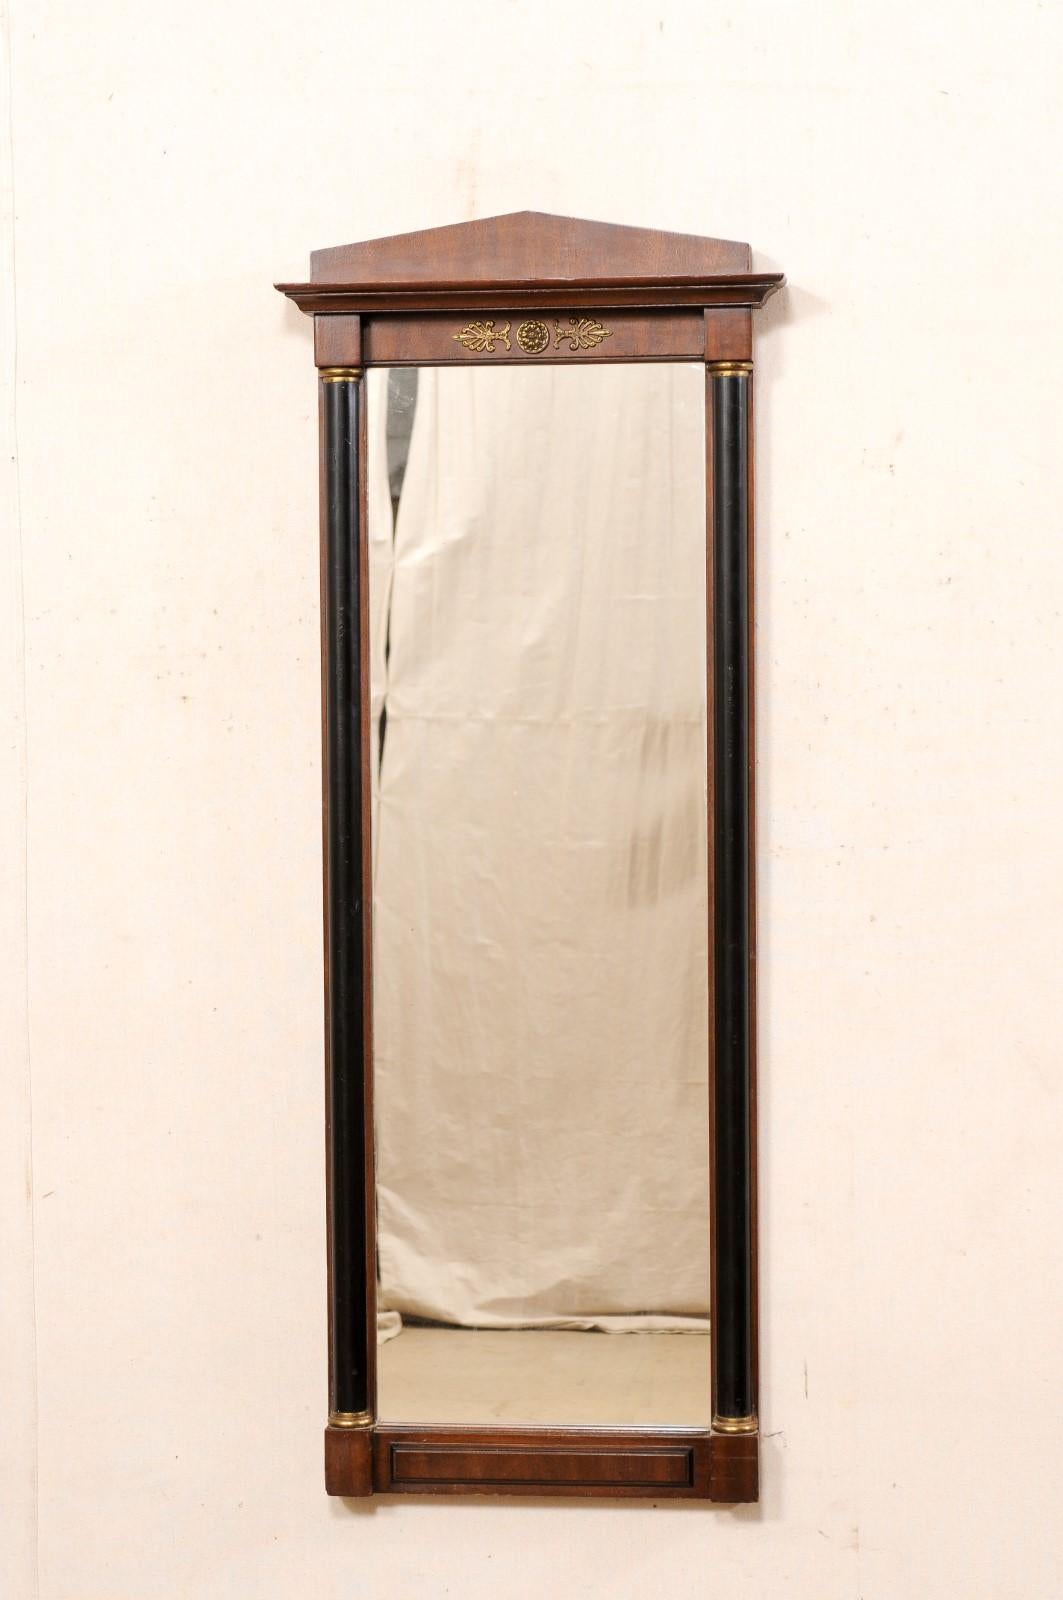 Neoclassical Swedish Neoclassic-Style & Slender Mirror, Early 20th Century